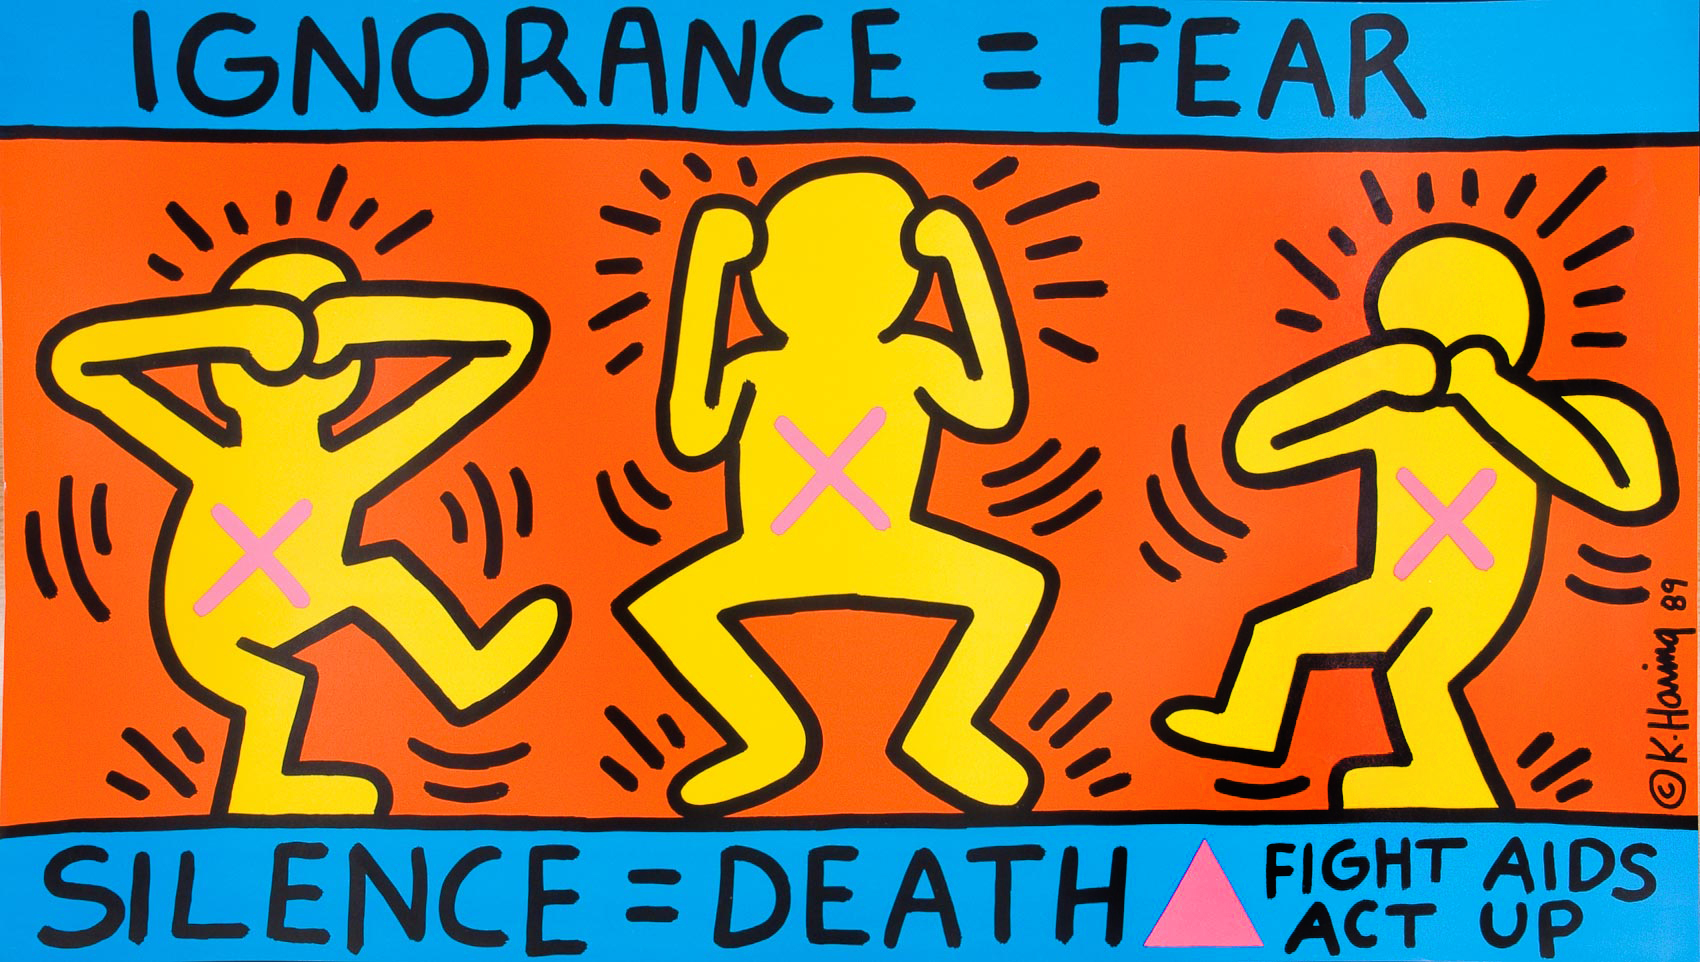 A 1989 poster made for the group ACT UP by the artist Keith Haring.